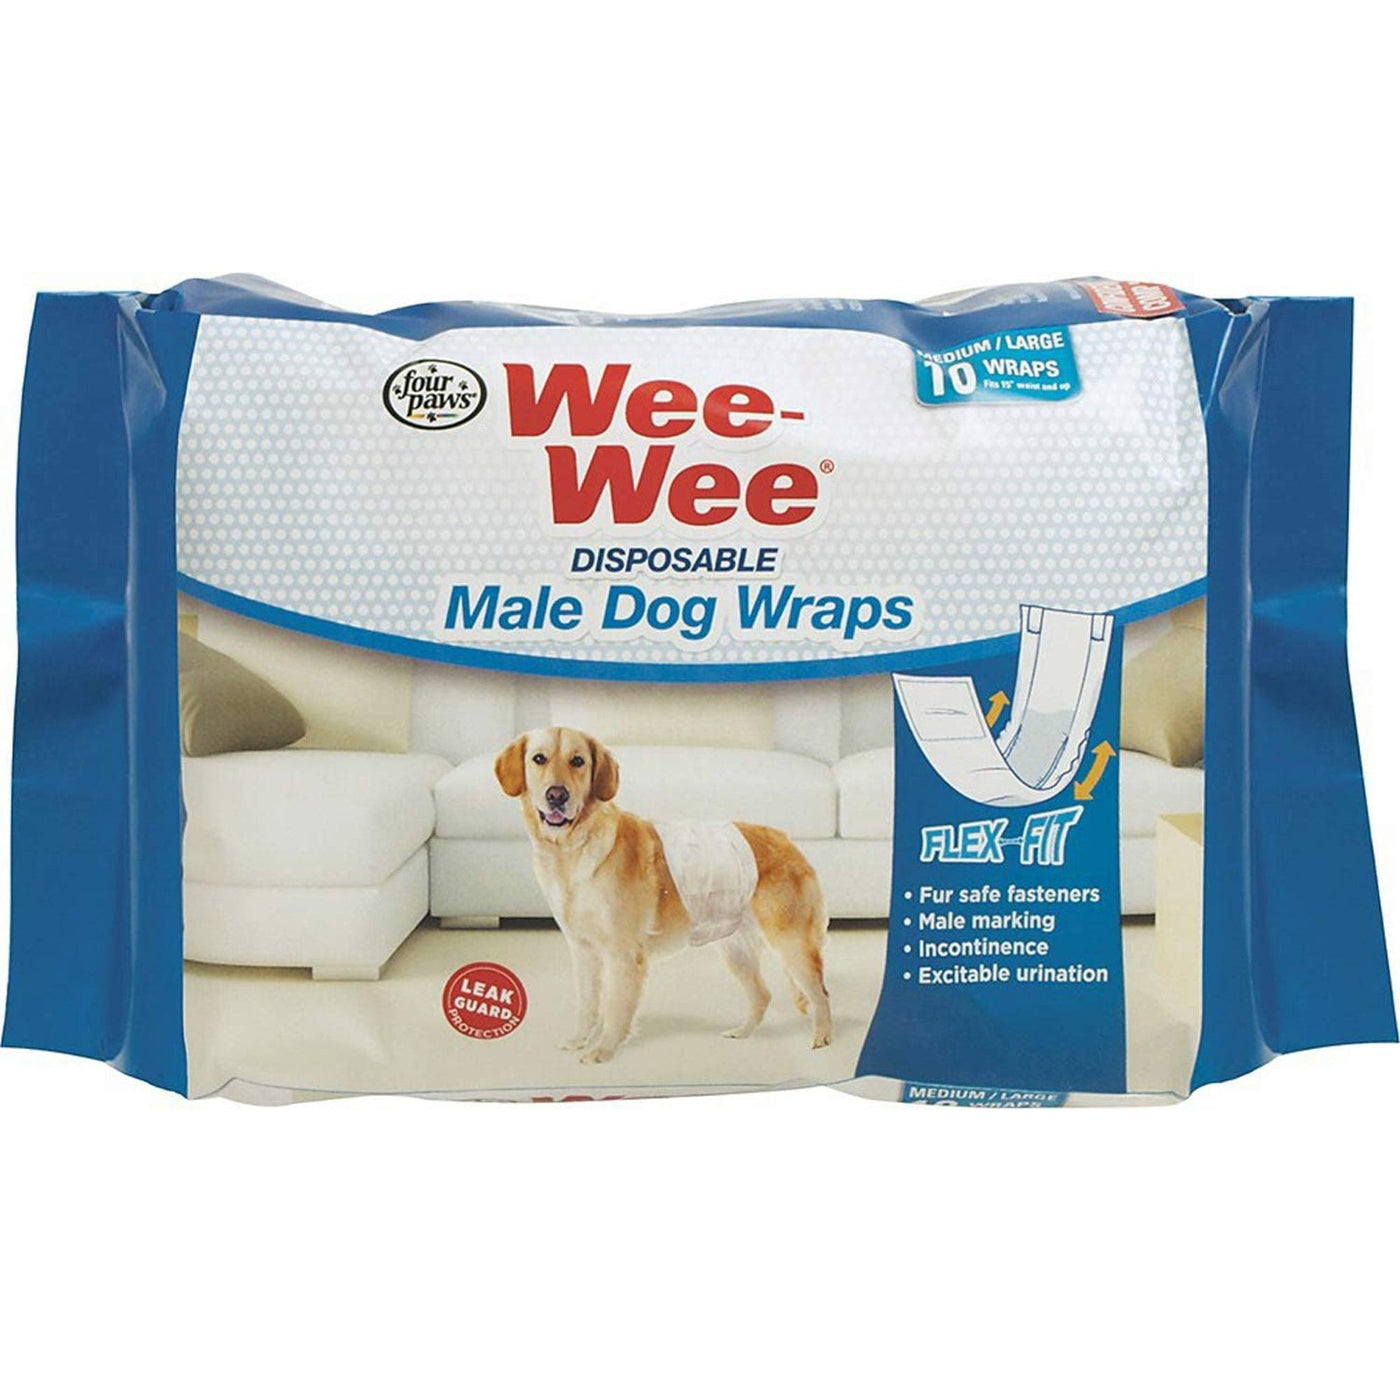 Four Paws Wee-Wee Disposable Male Dog Wraps 36Count